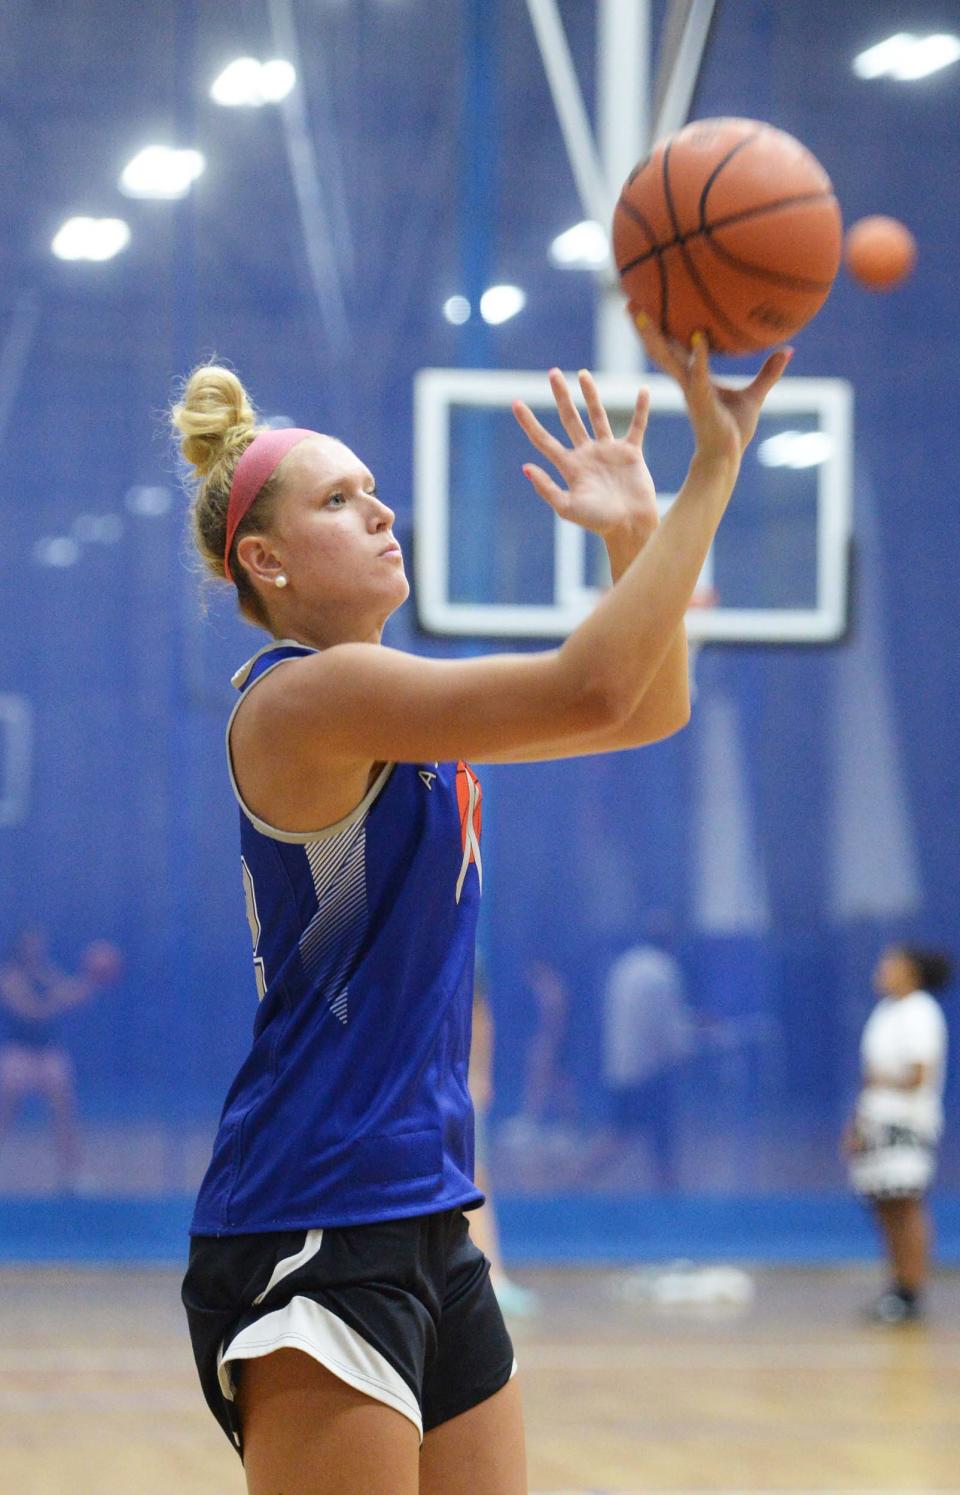 Shay Bollin, of Bridgewater-Raynham, participates in the Shot For Life annual basketball shooting fundraiser for cancer research at the Starland Sportsplex  and Fun Park in Hanover on Saturday, Aug. 7, 2021.